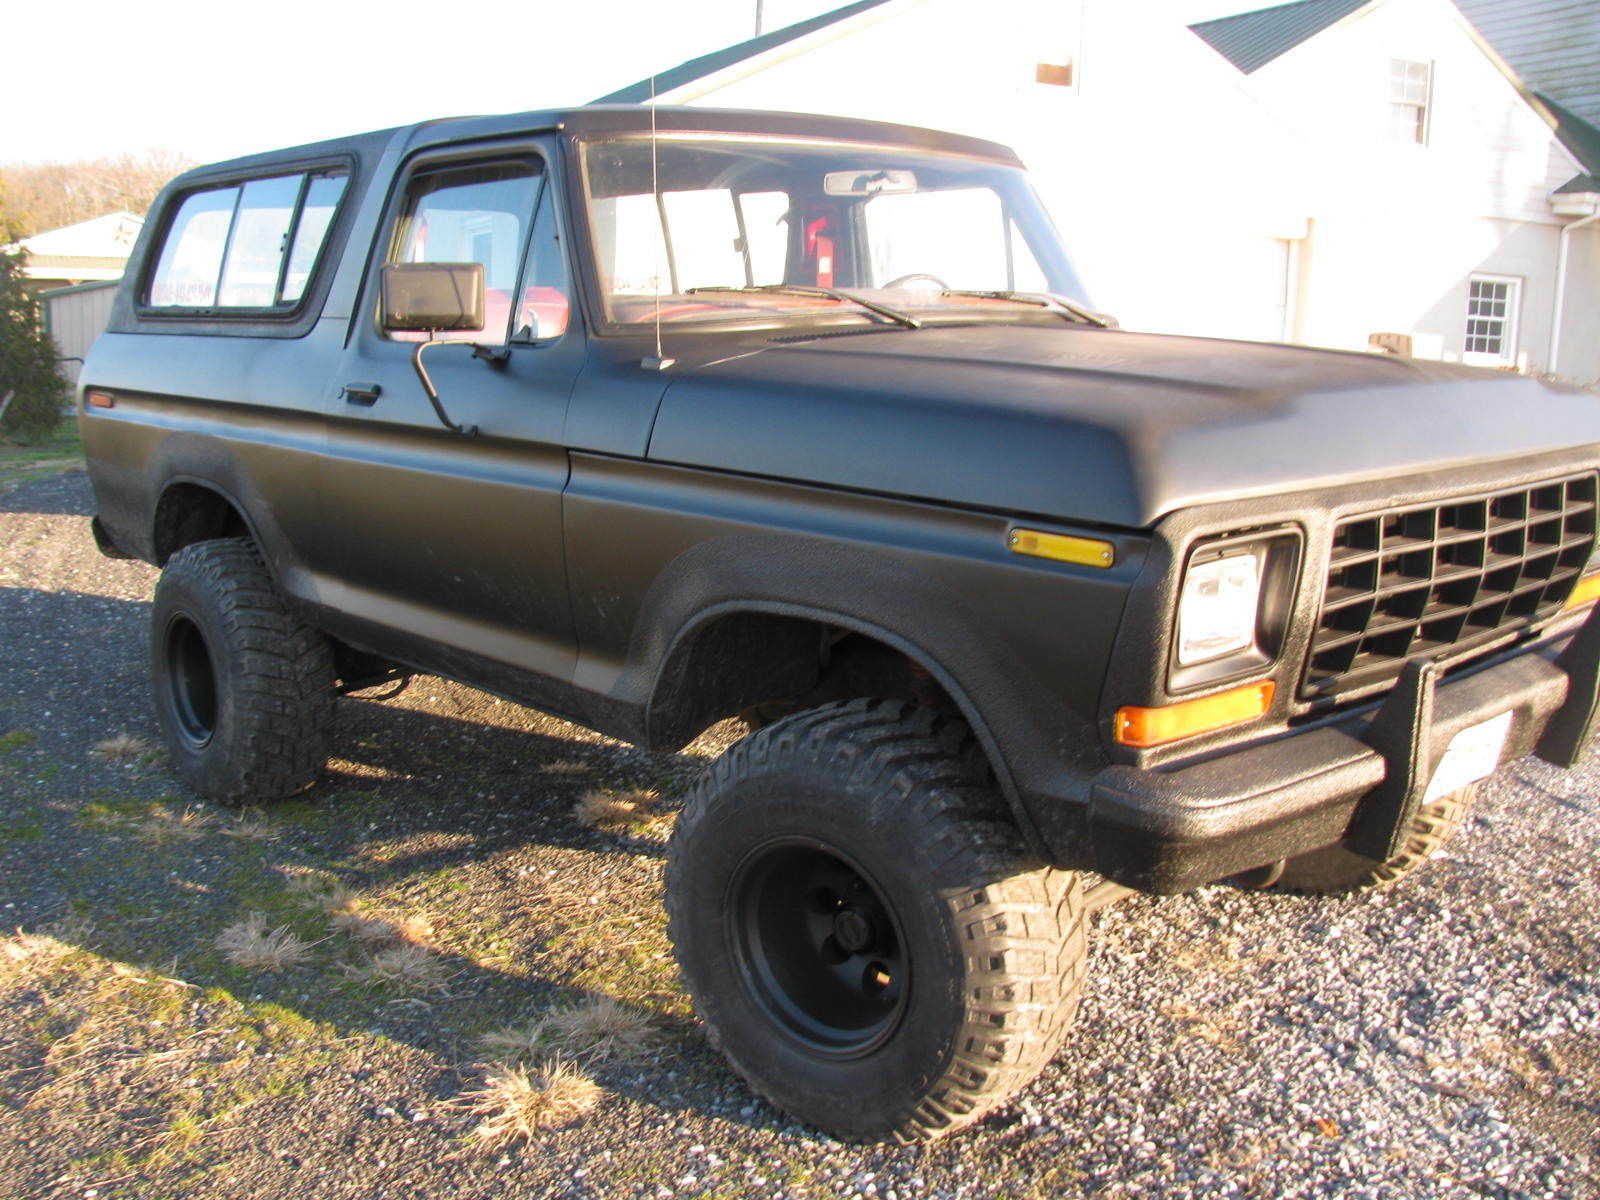 1978 ford bronco 4x4 lifted classic ford truck for sale in Cambridge, Maryland, United States